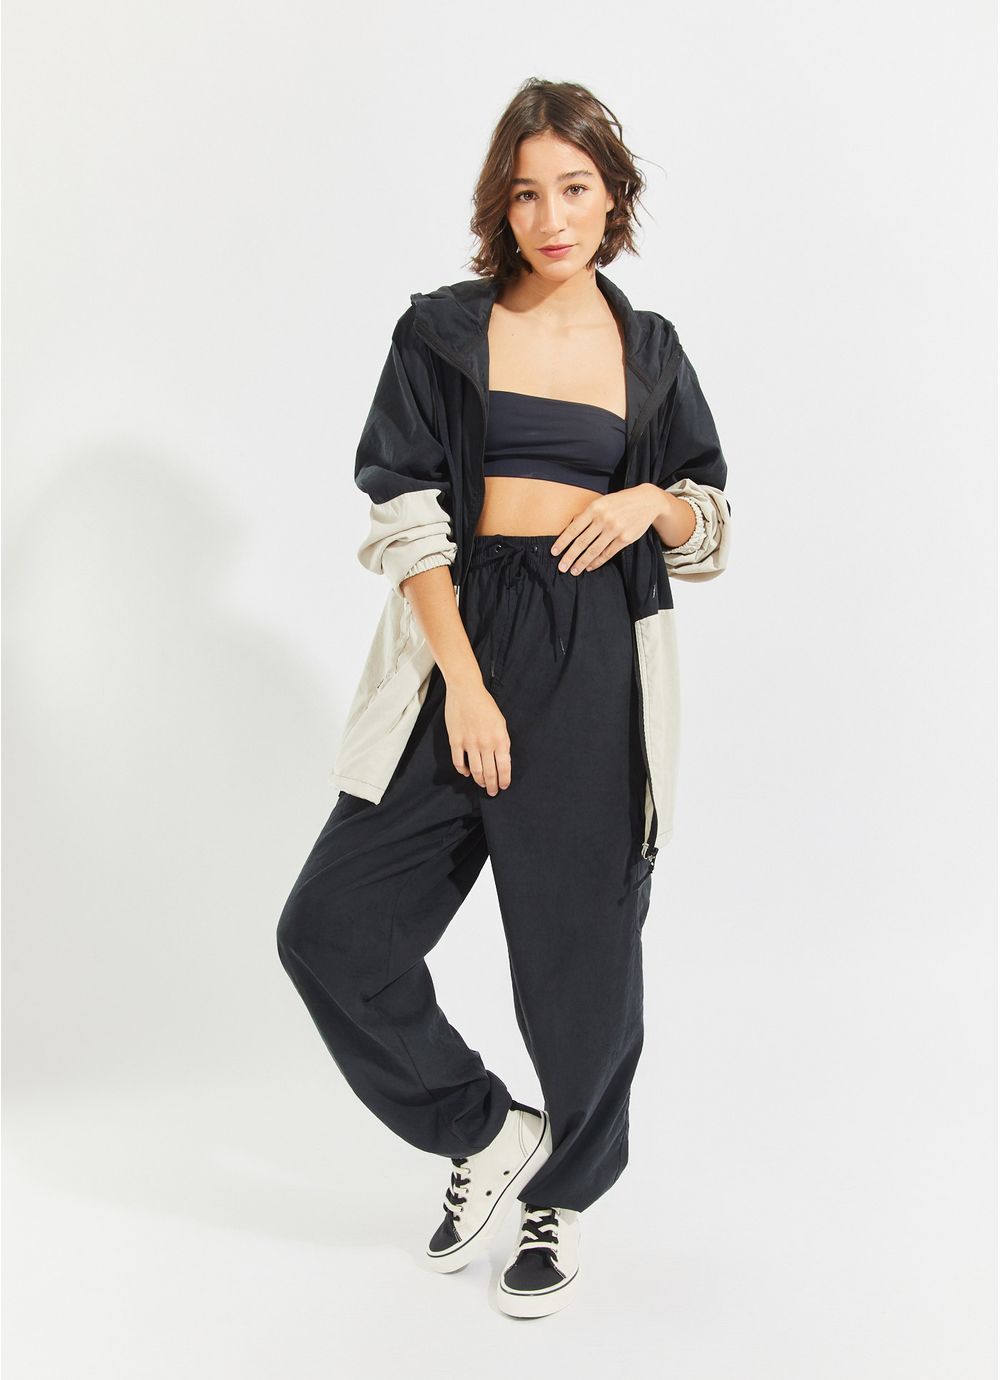 Shop the X-girl Bicolor Track Pants - Real Girls' Streetwear at X-girl  Online Store